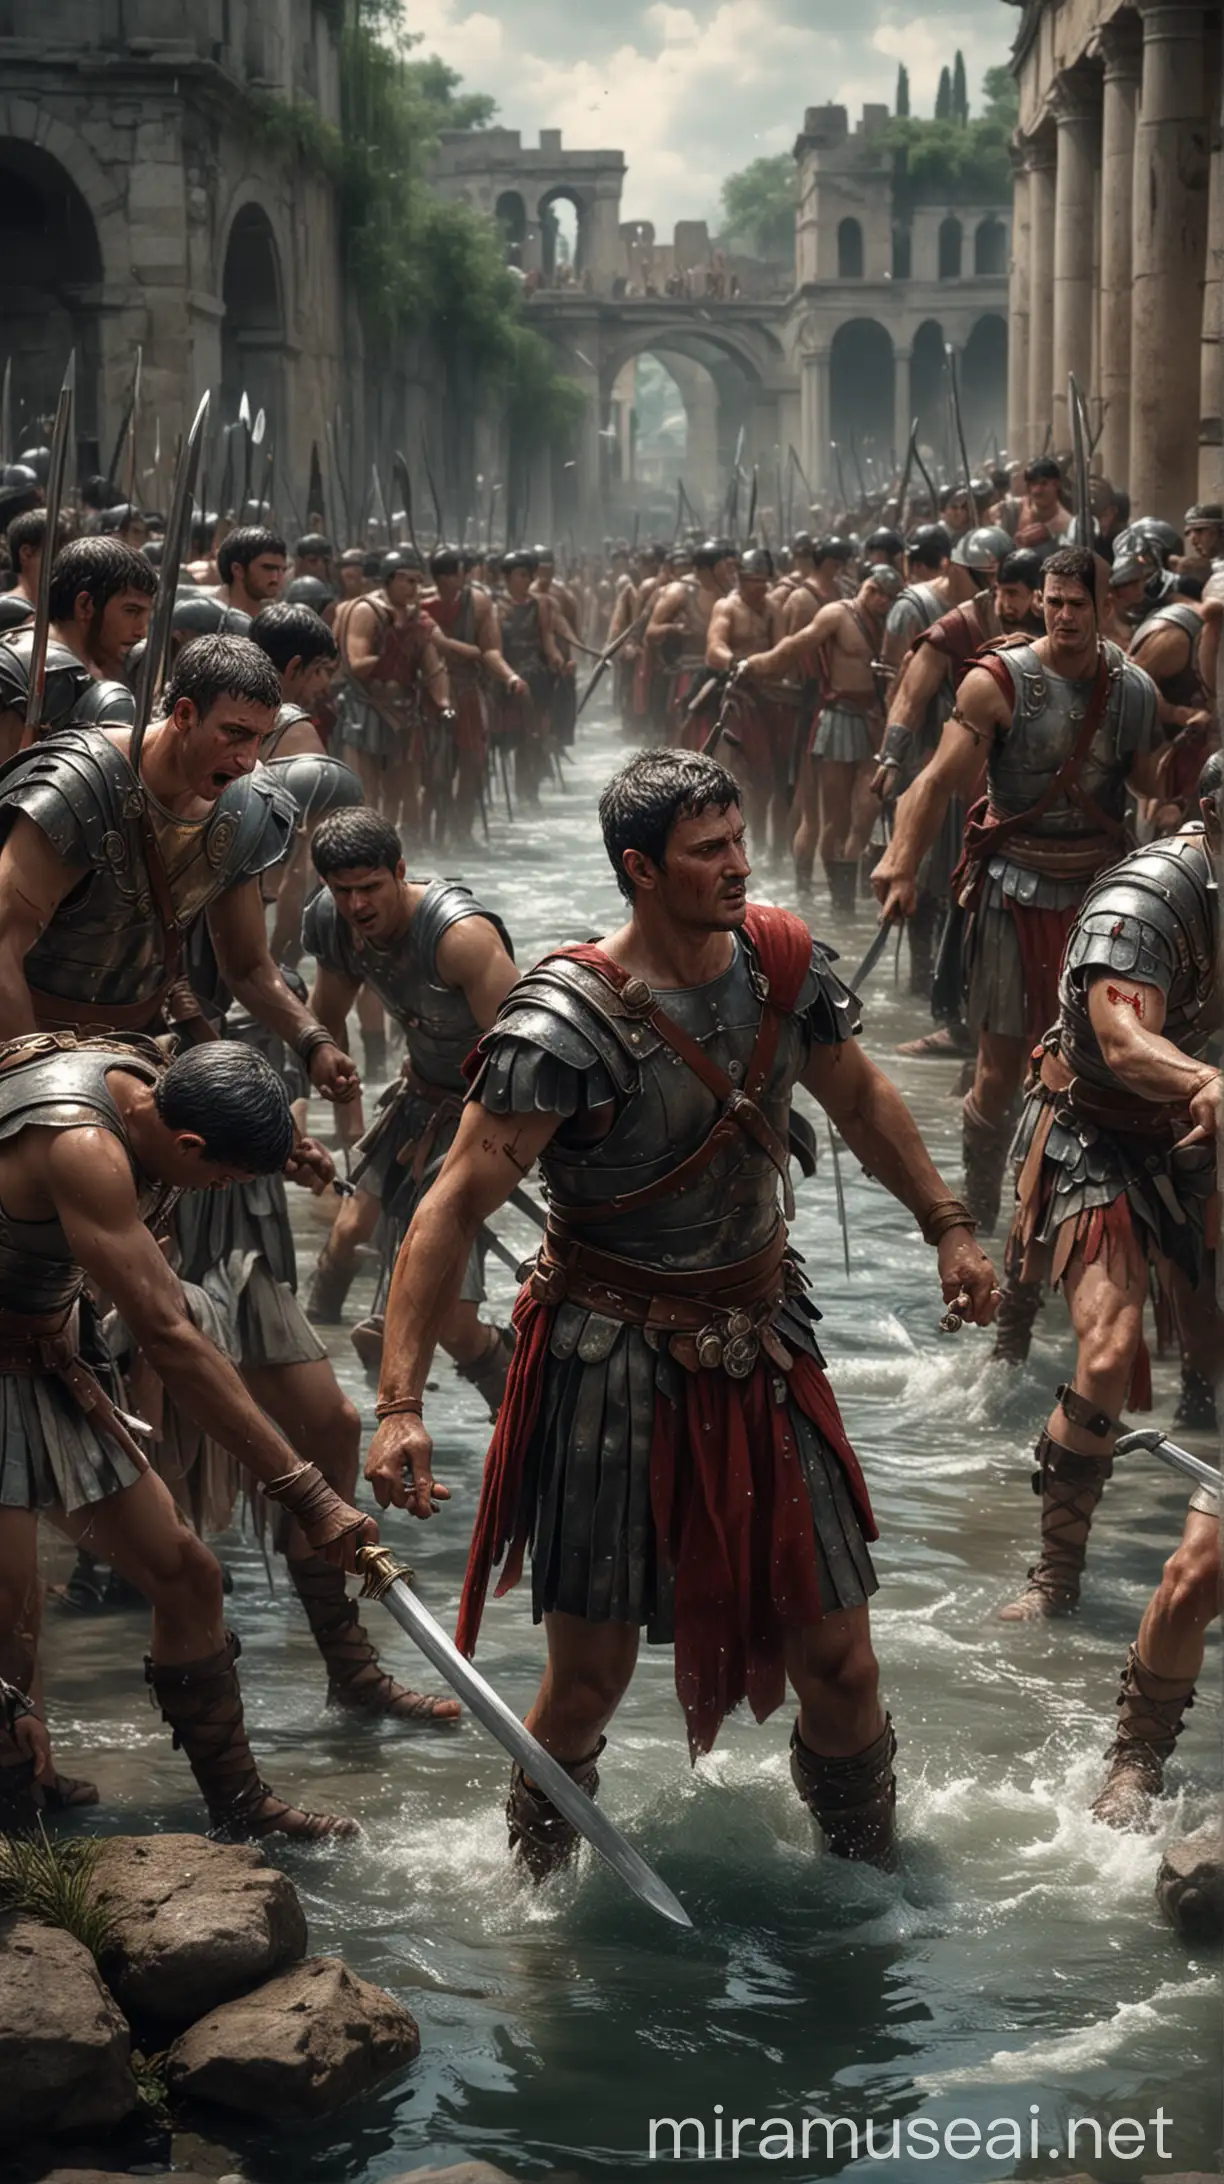 Roman Soldiers Stabbing Water Hyper Realistic Depiction with Caligula Observing